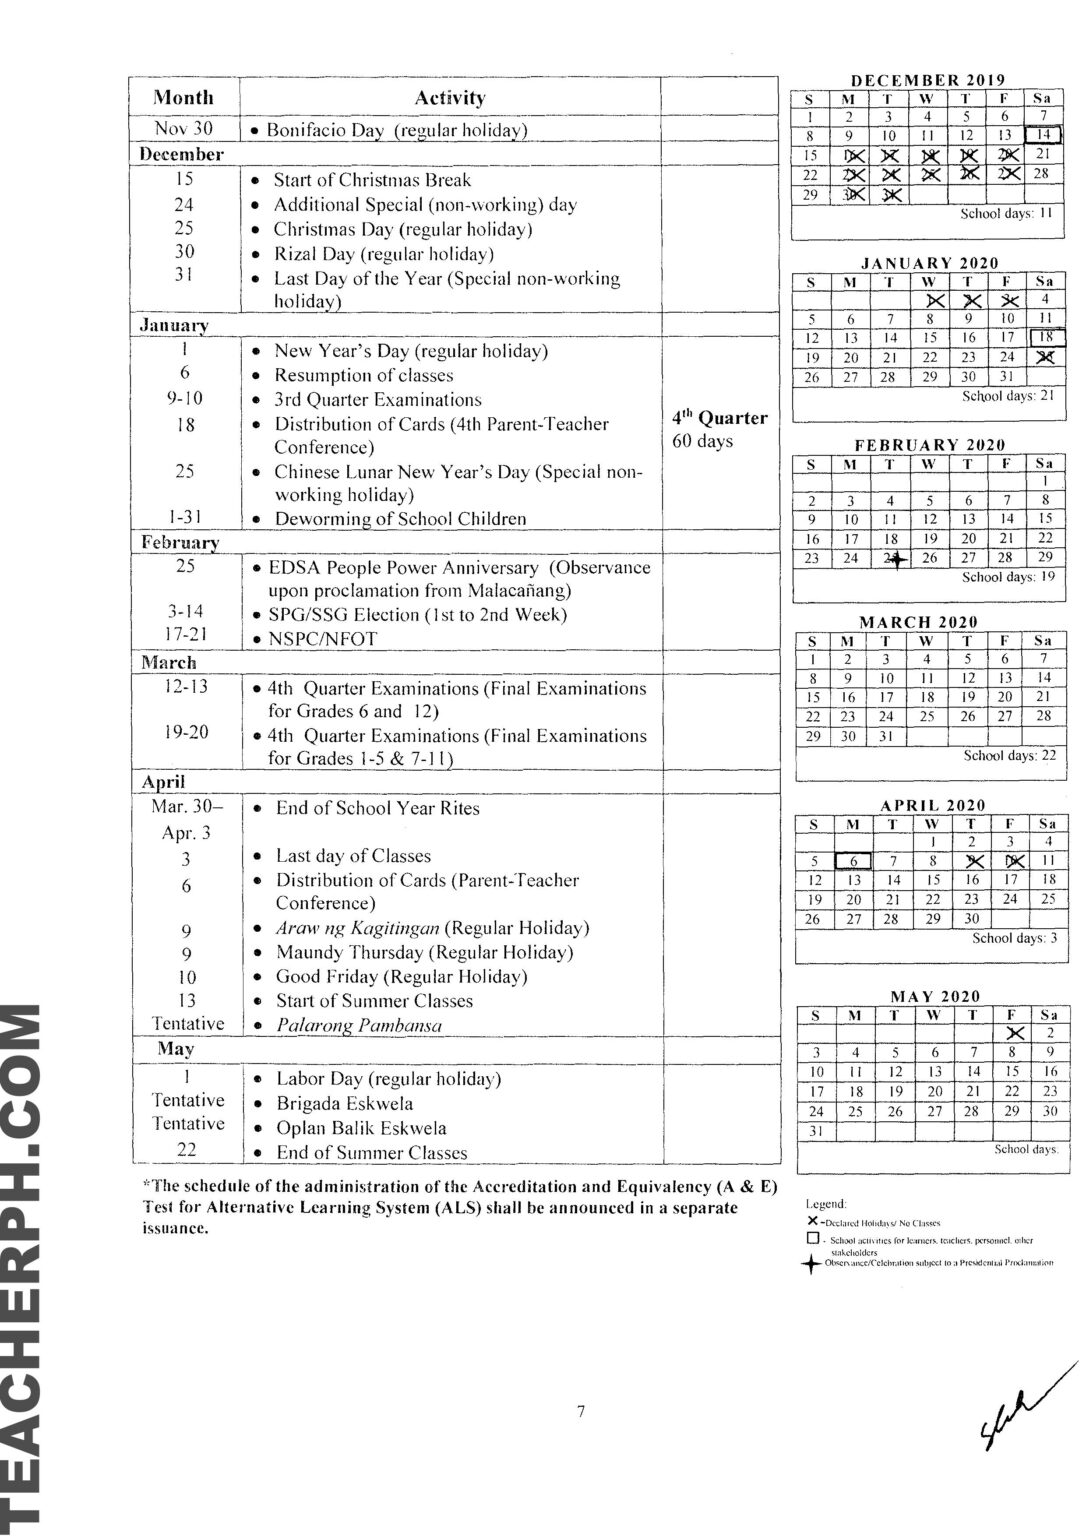 Deped Releases Revised Deped School Calendar For Sy 2020 2021 Deped Paito Warna 9440